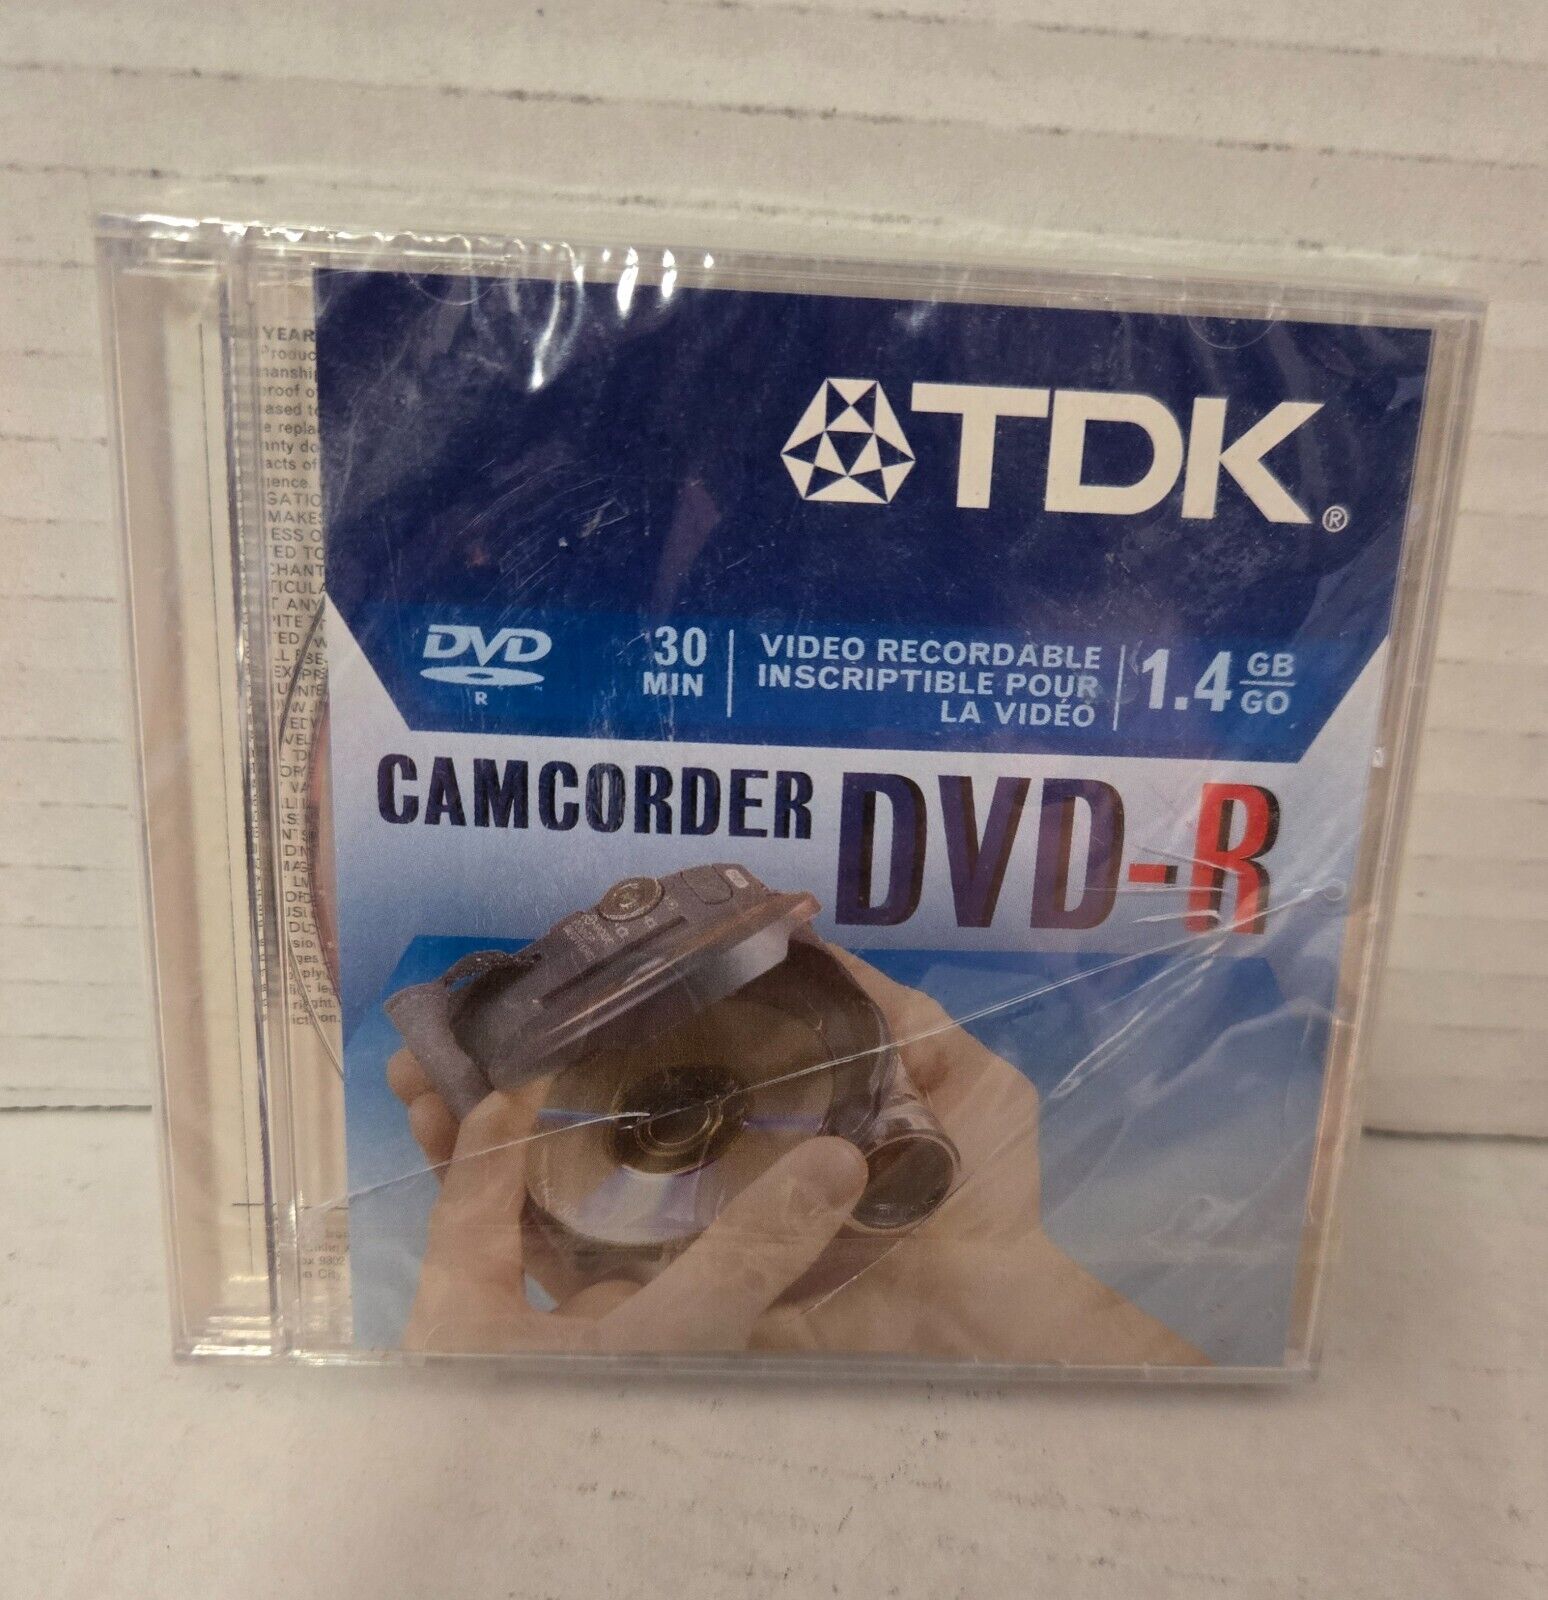 TDK - Camcorder 30 Minute Mini DVD-R Blank Disc 1.4gb Factory Sealed BRAND NEW